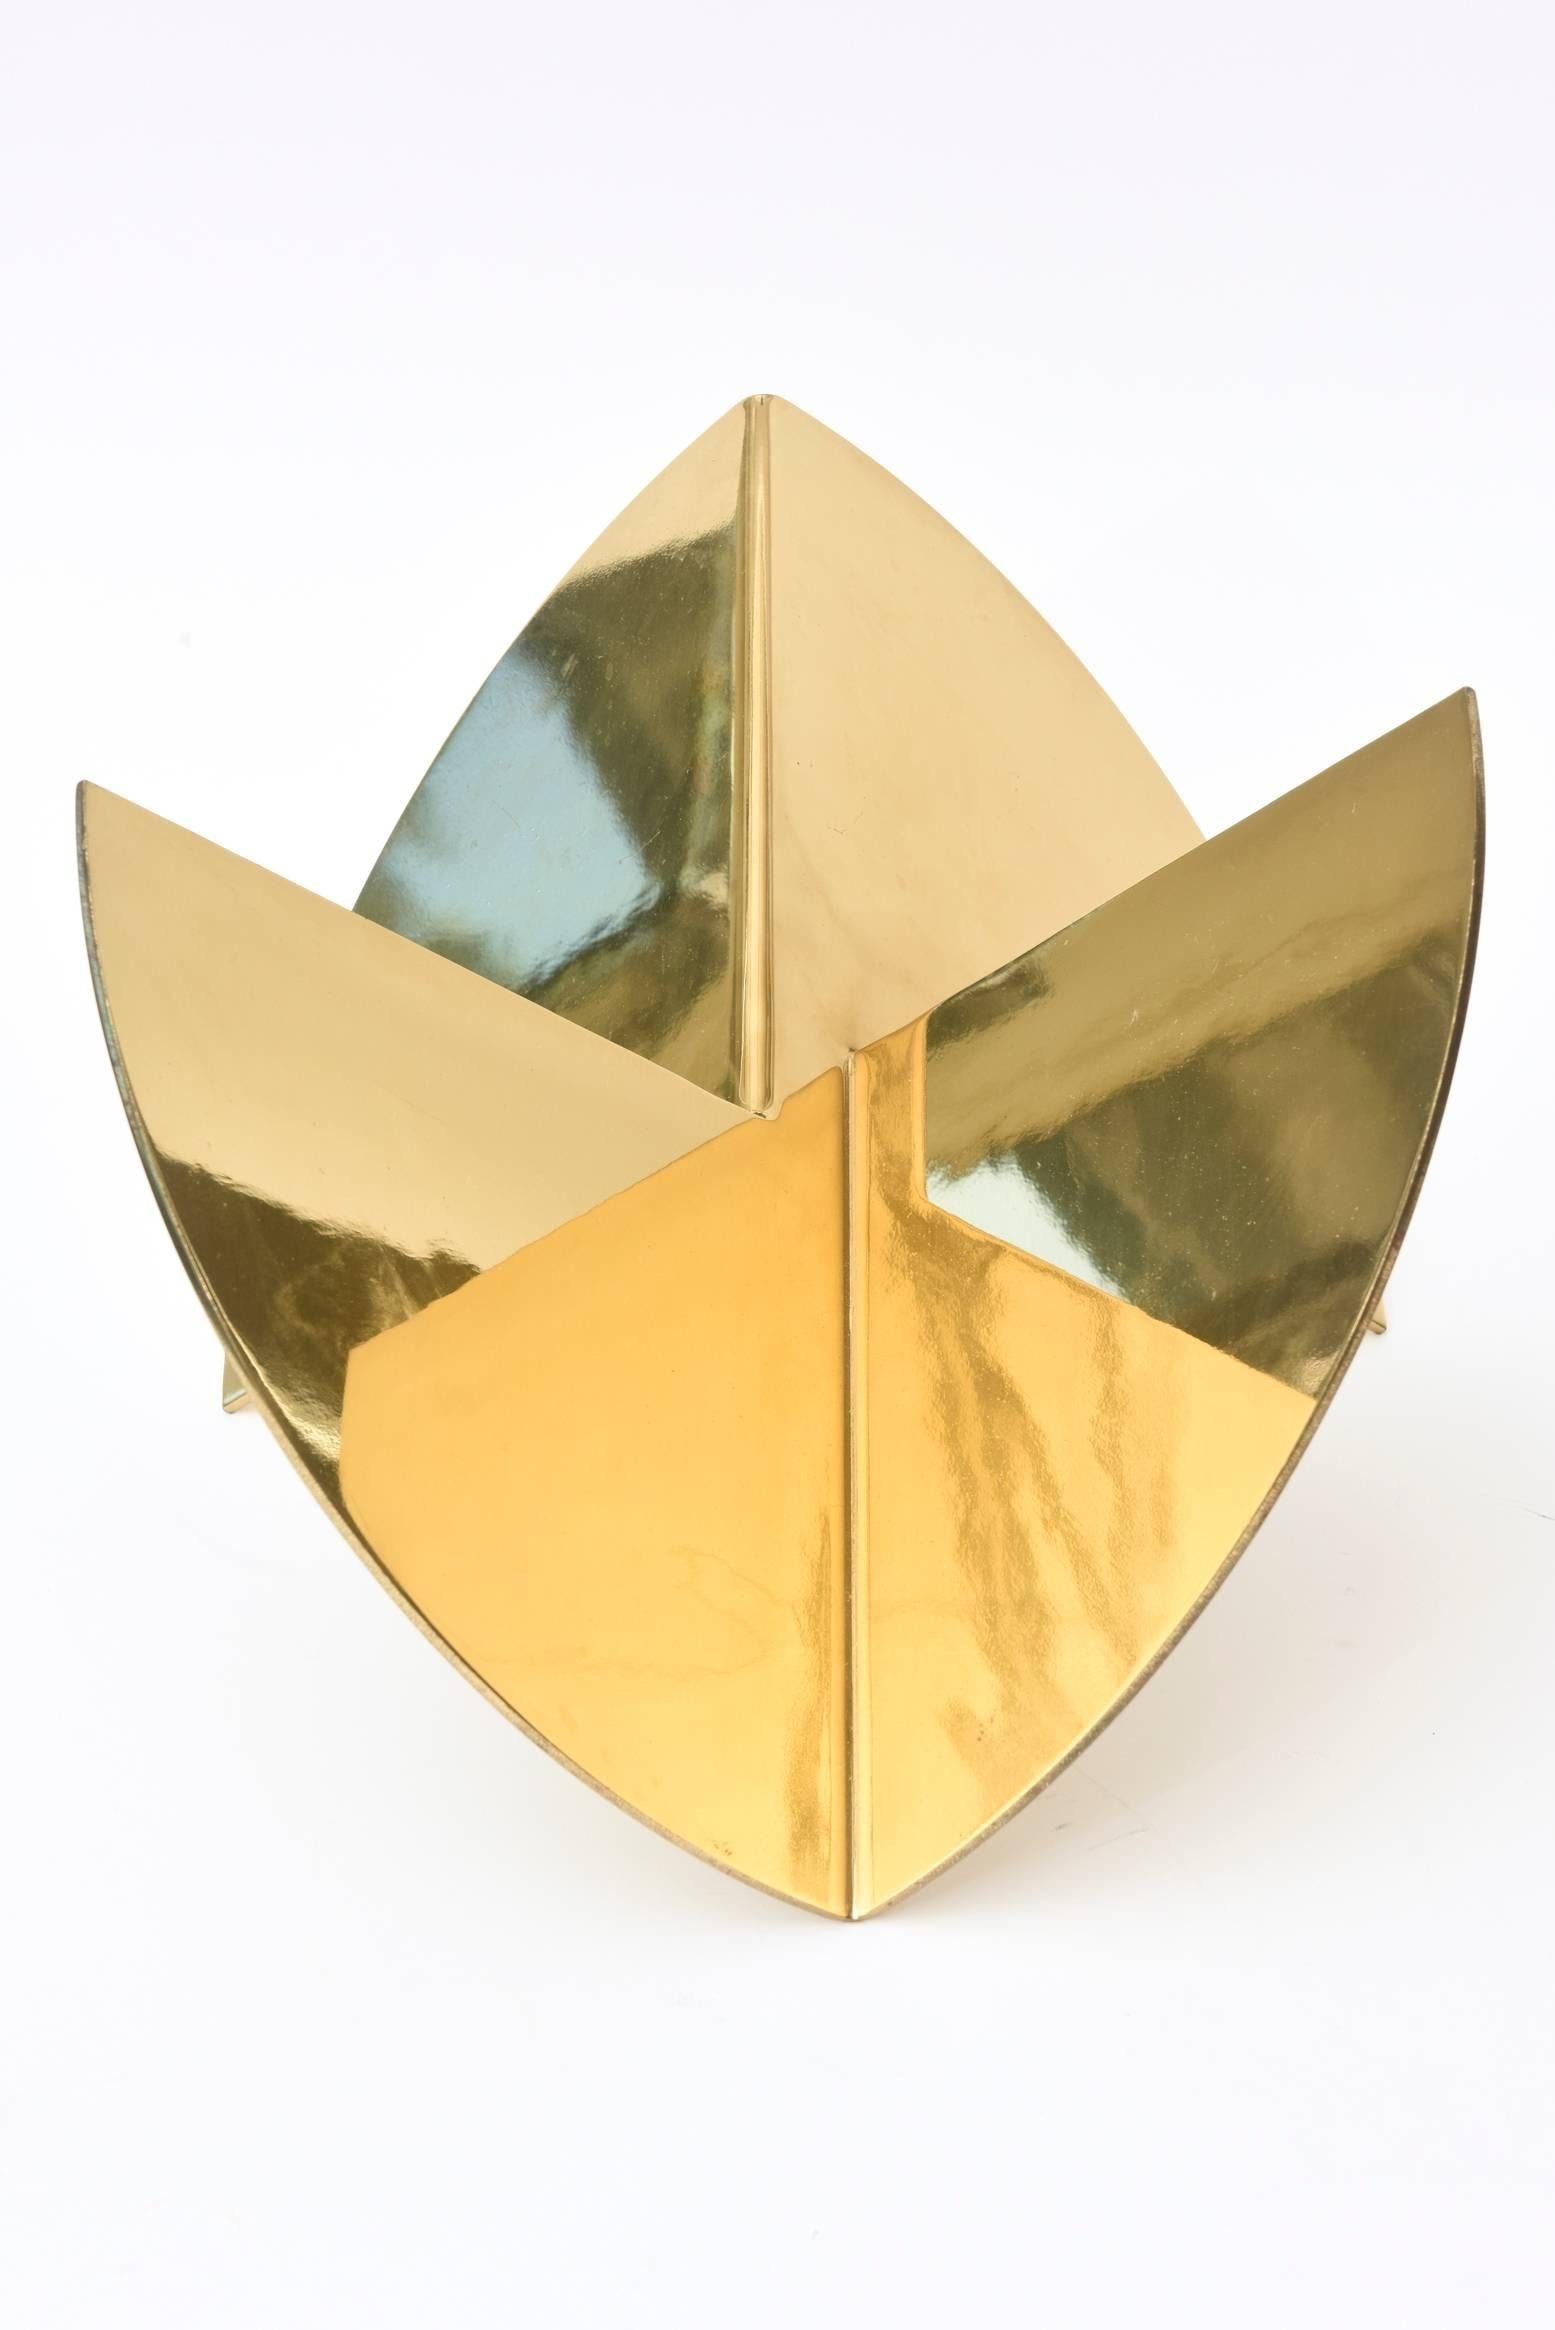  Abstract Geometric Intersecting Sculpture 1